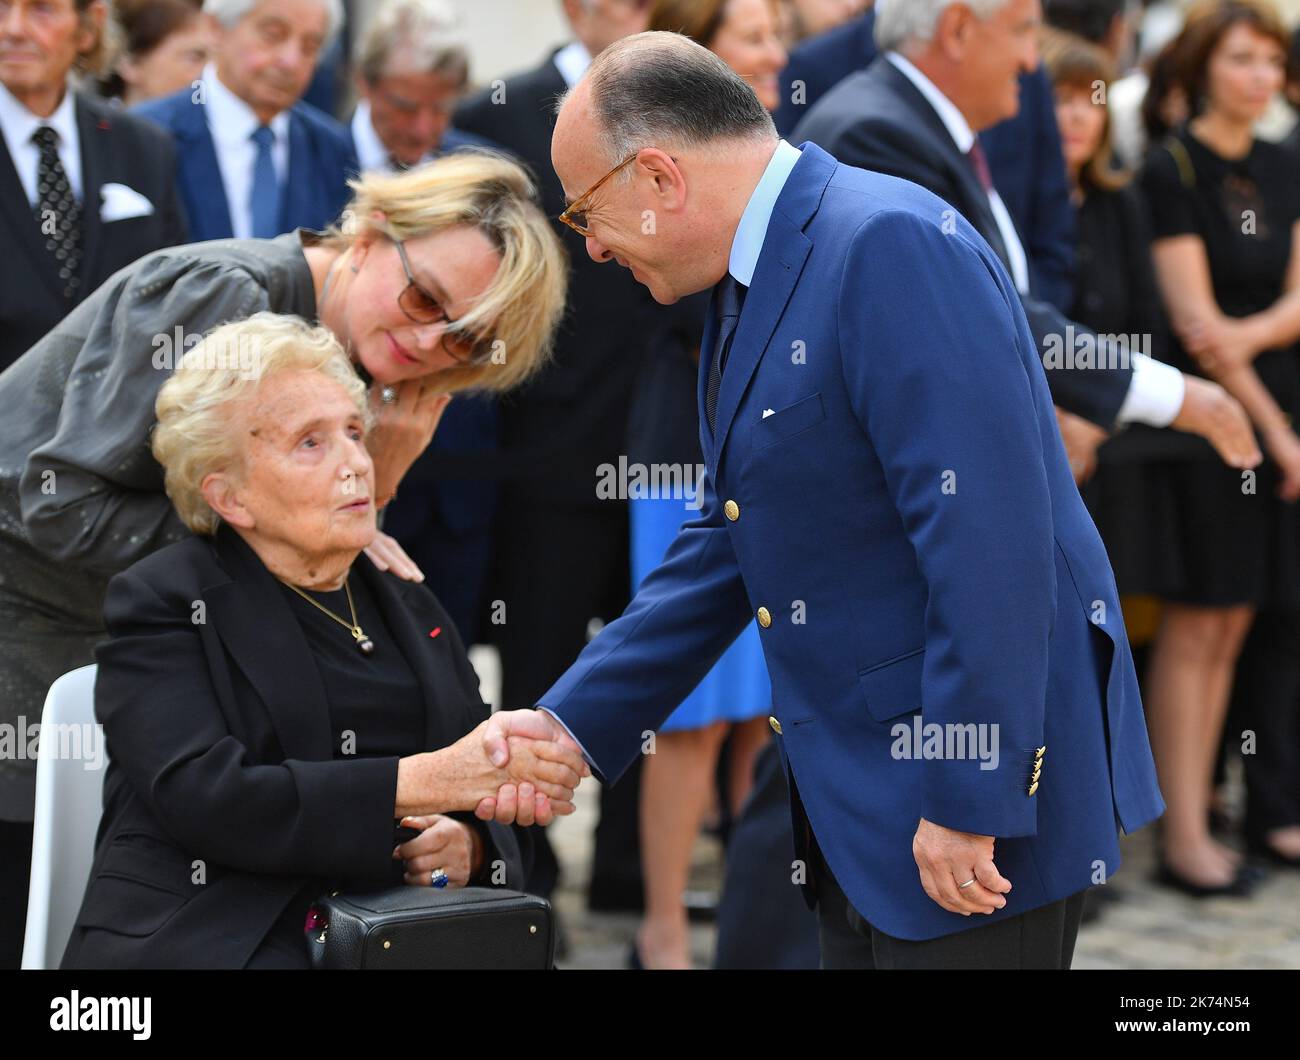 Bernadette Chirac and Bernard Cazeneuve during the funeral ceremony for Simone Veil, in the courtyard of the Invalides in Paris, France, 05 July 2017. Holocaust survivors are joining France's president and European dignitaries at a special memorial ceremony for Simone Veil, who rose from the horrors of Nazi death camps to become president of the European Parliament and one of France's most revered politicians LTG Stock Photo